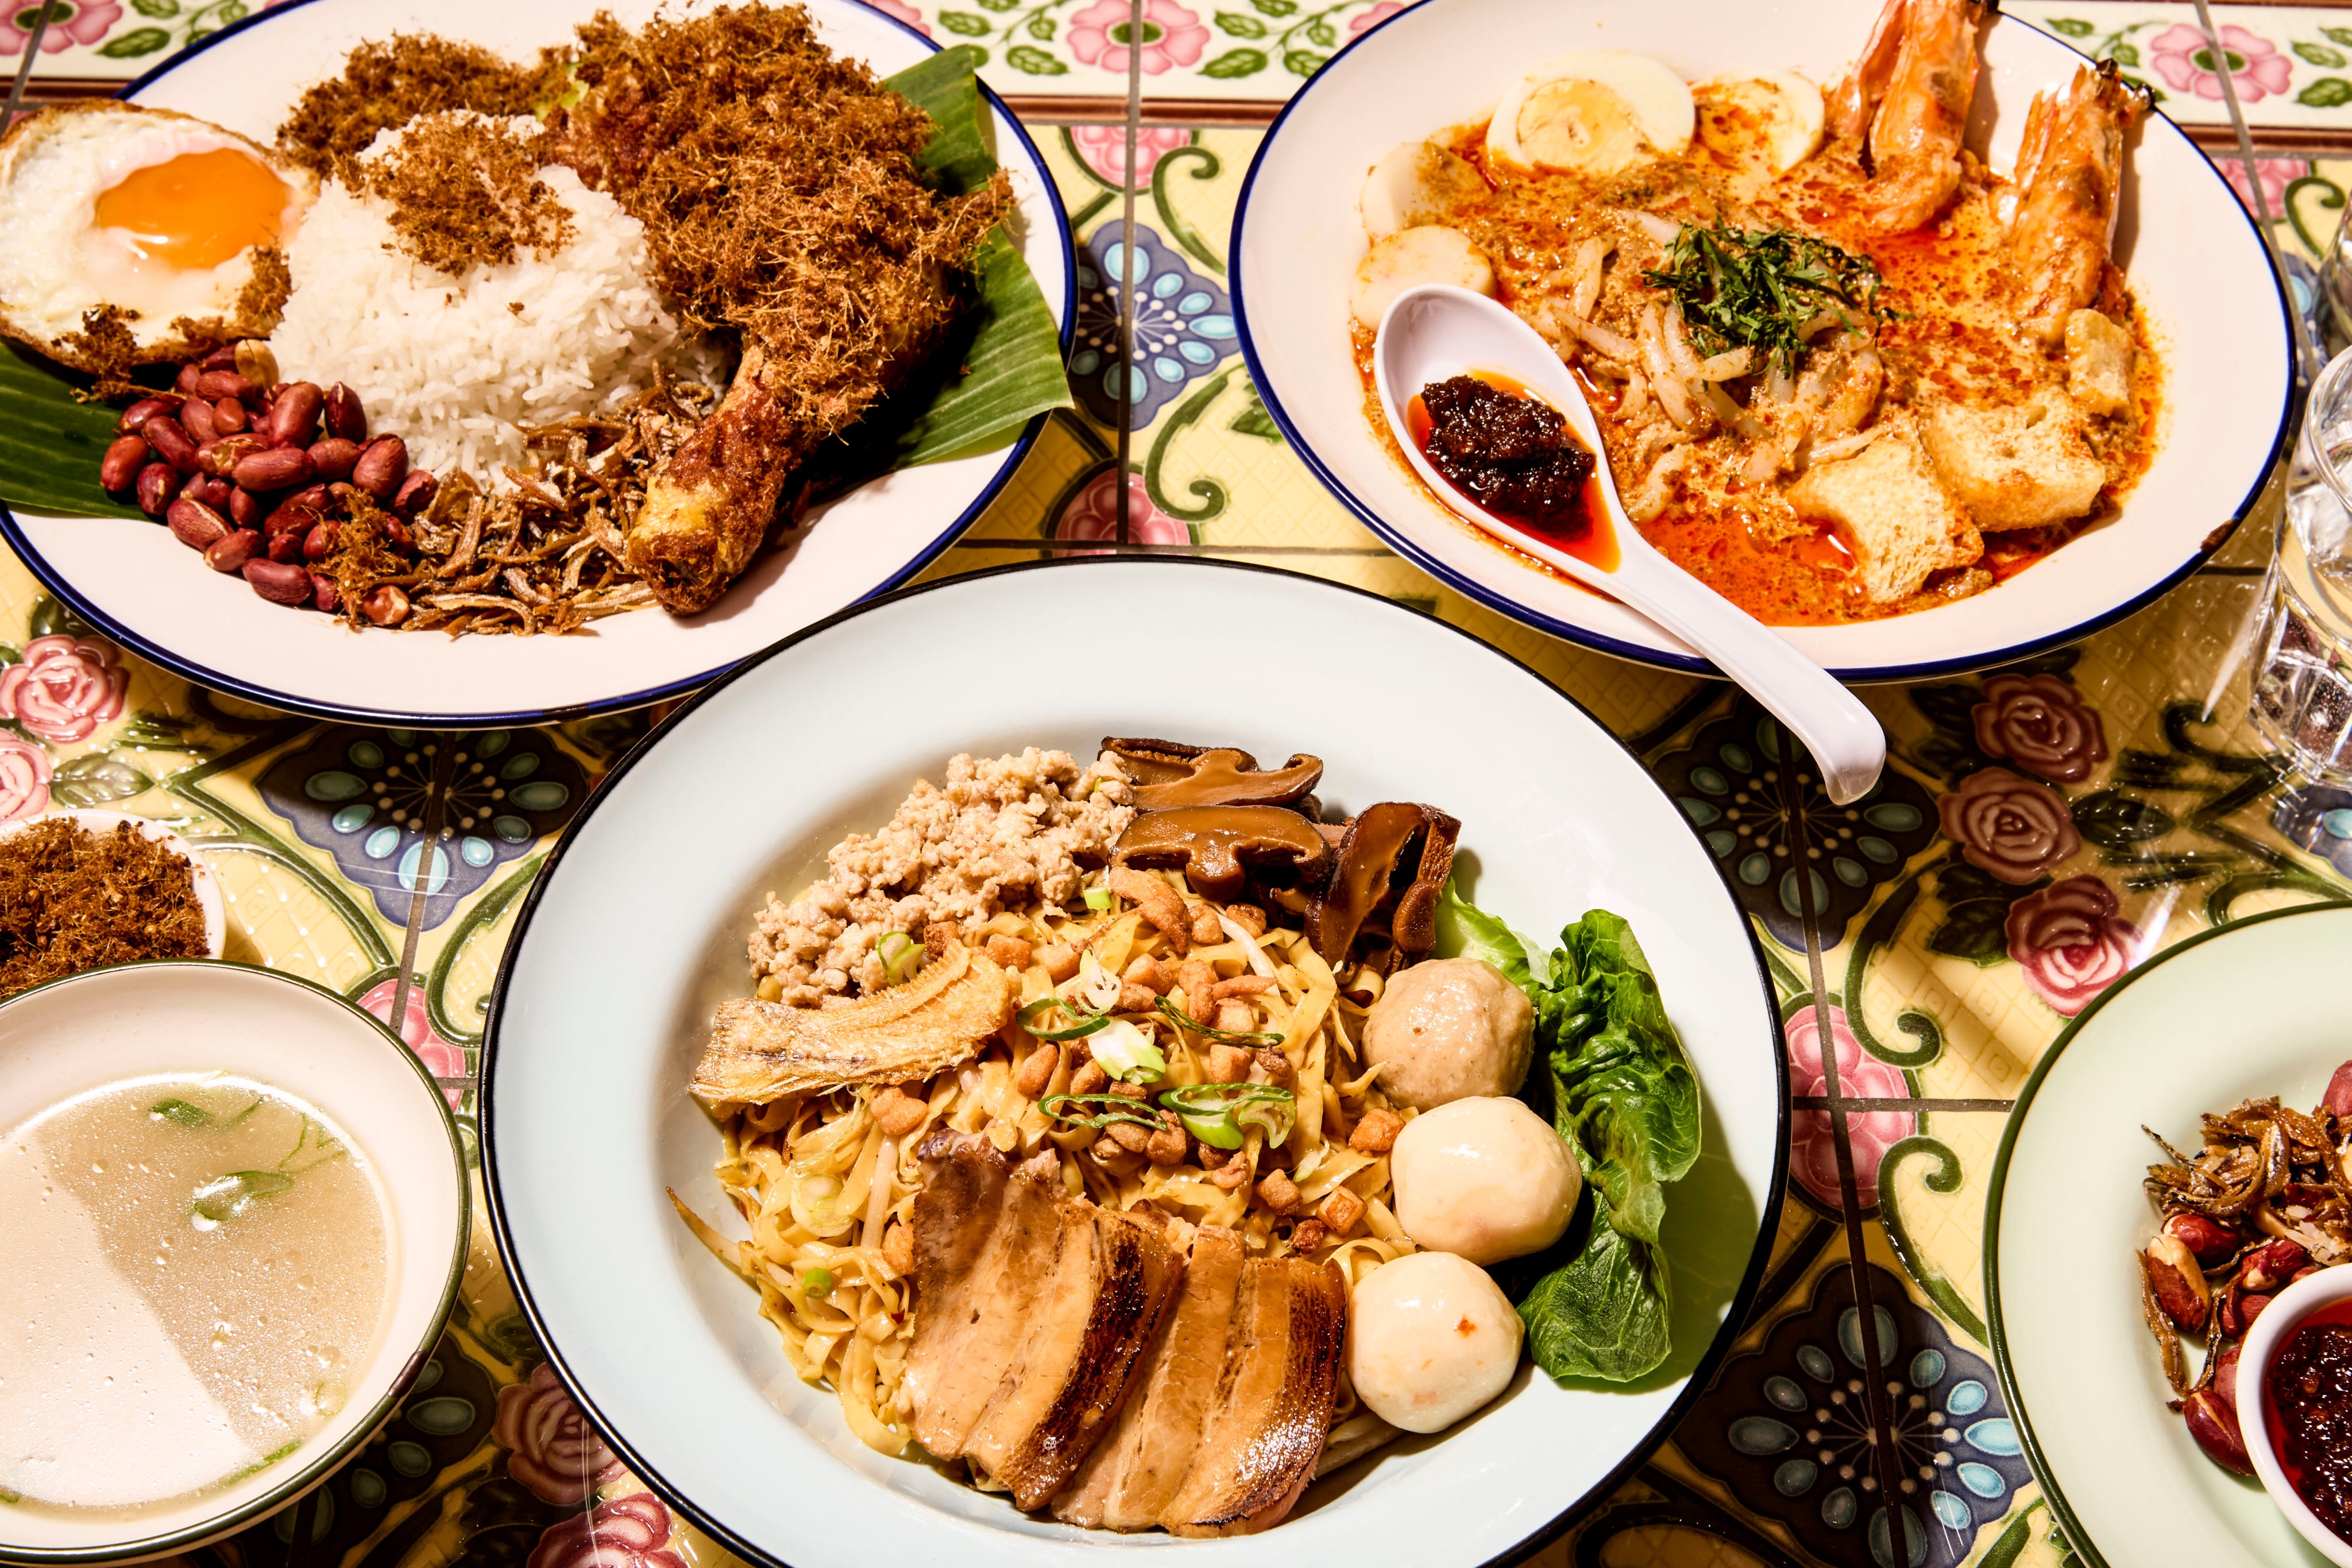 Singapulah, opened in Central London, serves traditional Singaporean dishes including bak chor mee (middle) and laksa (right). Photo: Singapulah